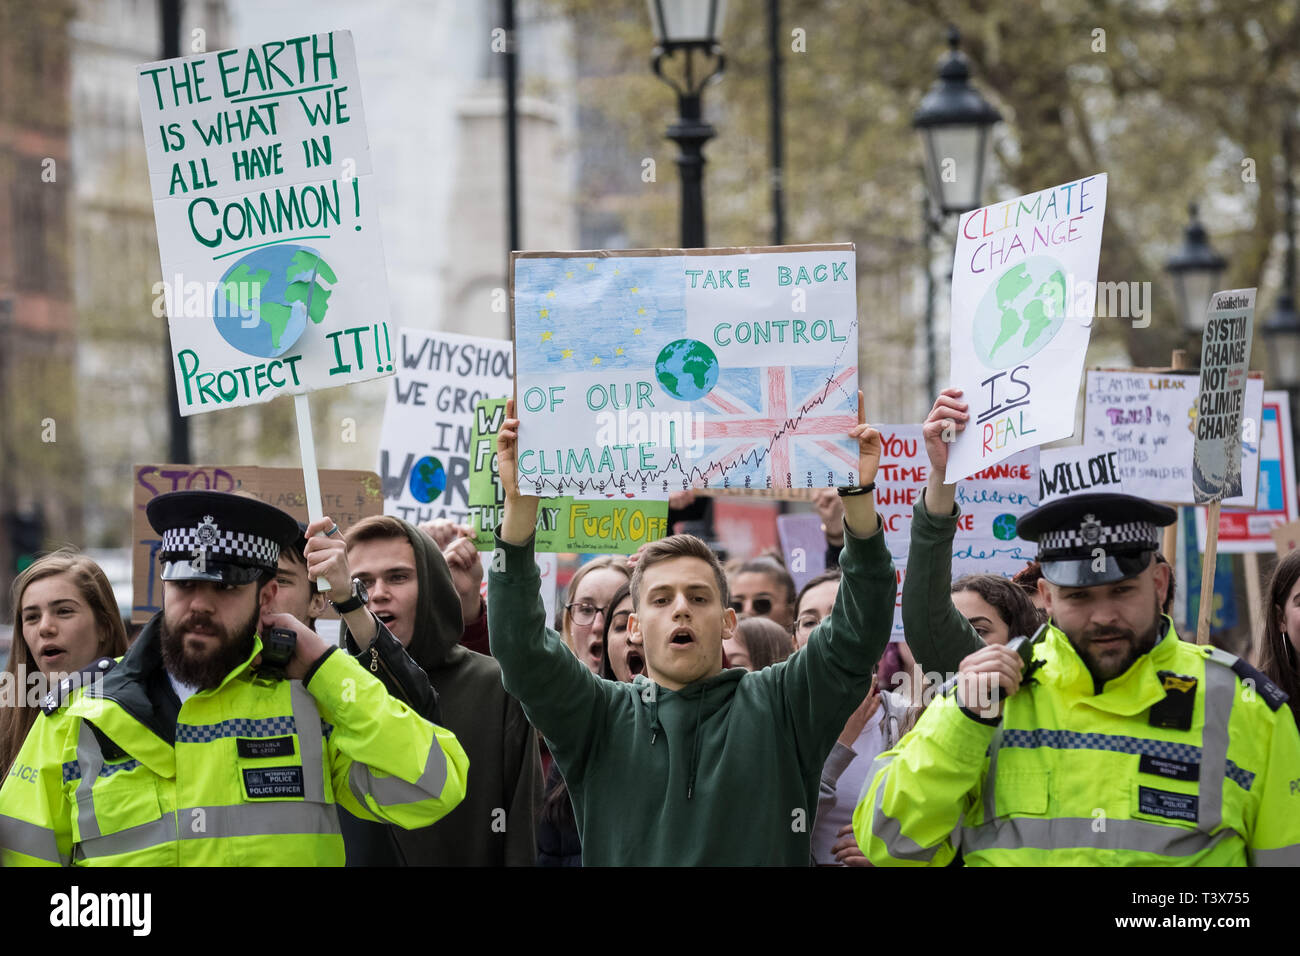 London, UK. 12th April 2019. Students take part in the third Youth Strike 4 Climate. Pupils from schools, colleges and universities walk out from lessons to protest in Westminster for the third Youth Strike 4 Climate / Fridays For Future nationwide climate change protest action. Credit: Guy Corbishley/Alamy Live News Stock Photo